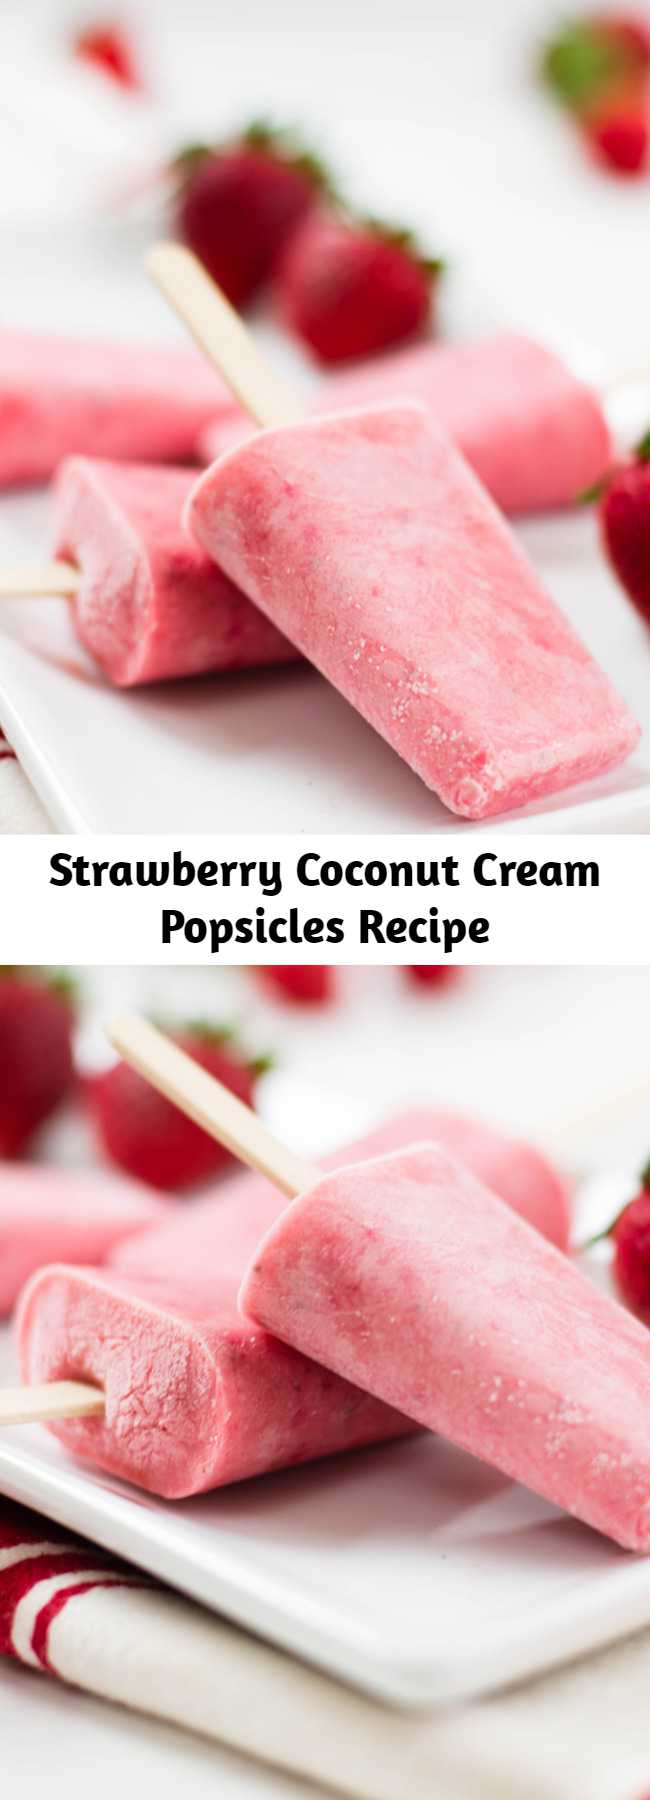 Strawberry Coconut Cream Popsicles Recipe - This is a berry sweet way to cool off this summer.